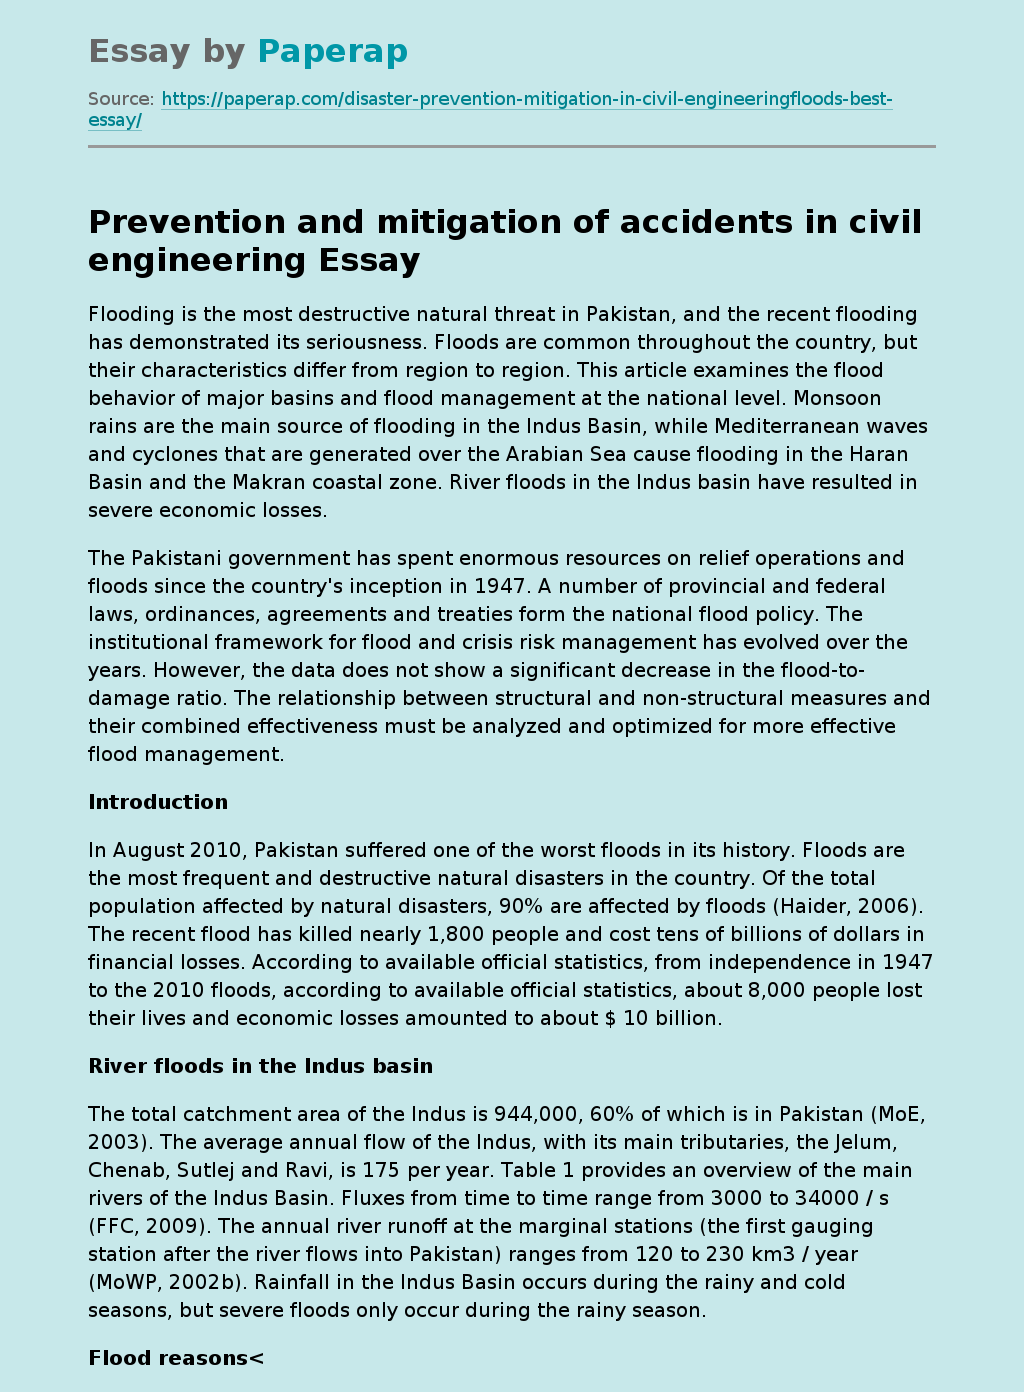 Prevention and mitigation of accidents in civil engineering